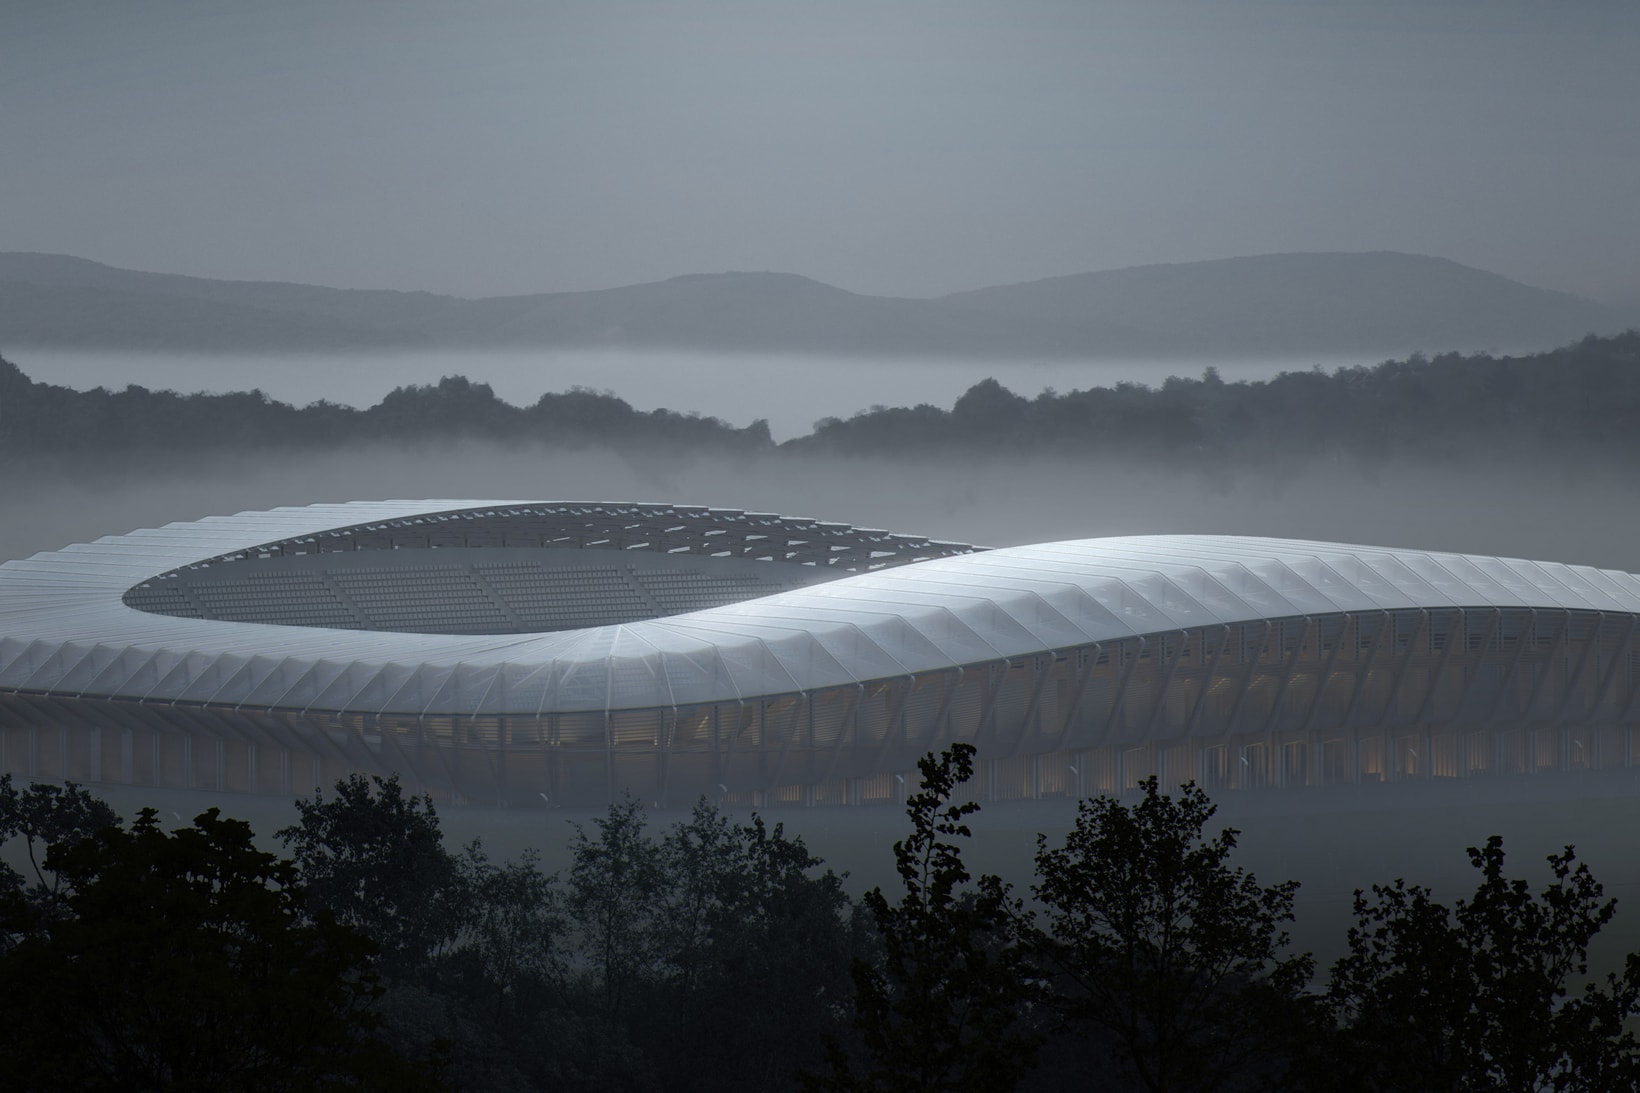 Zaha Hadid Architects First Wooden Soccer Stadium Forest Green Rovers